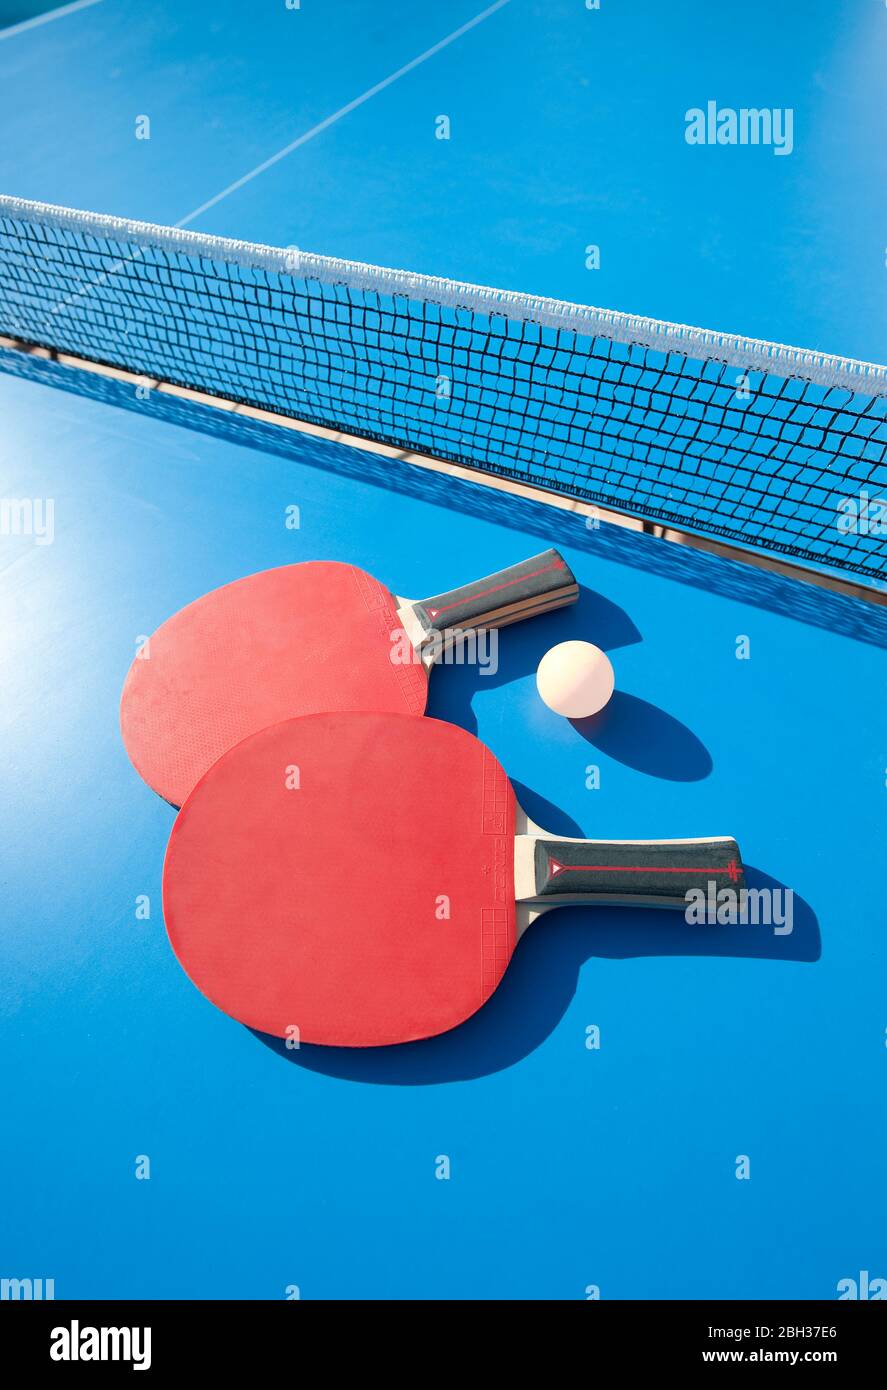 Table tennis bats and ball on table with net Stock Photo - Alamy